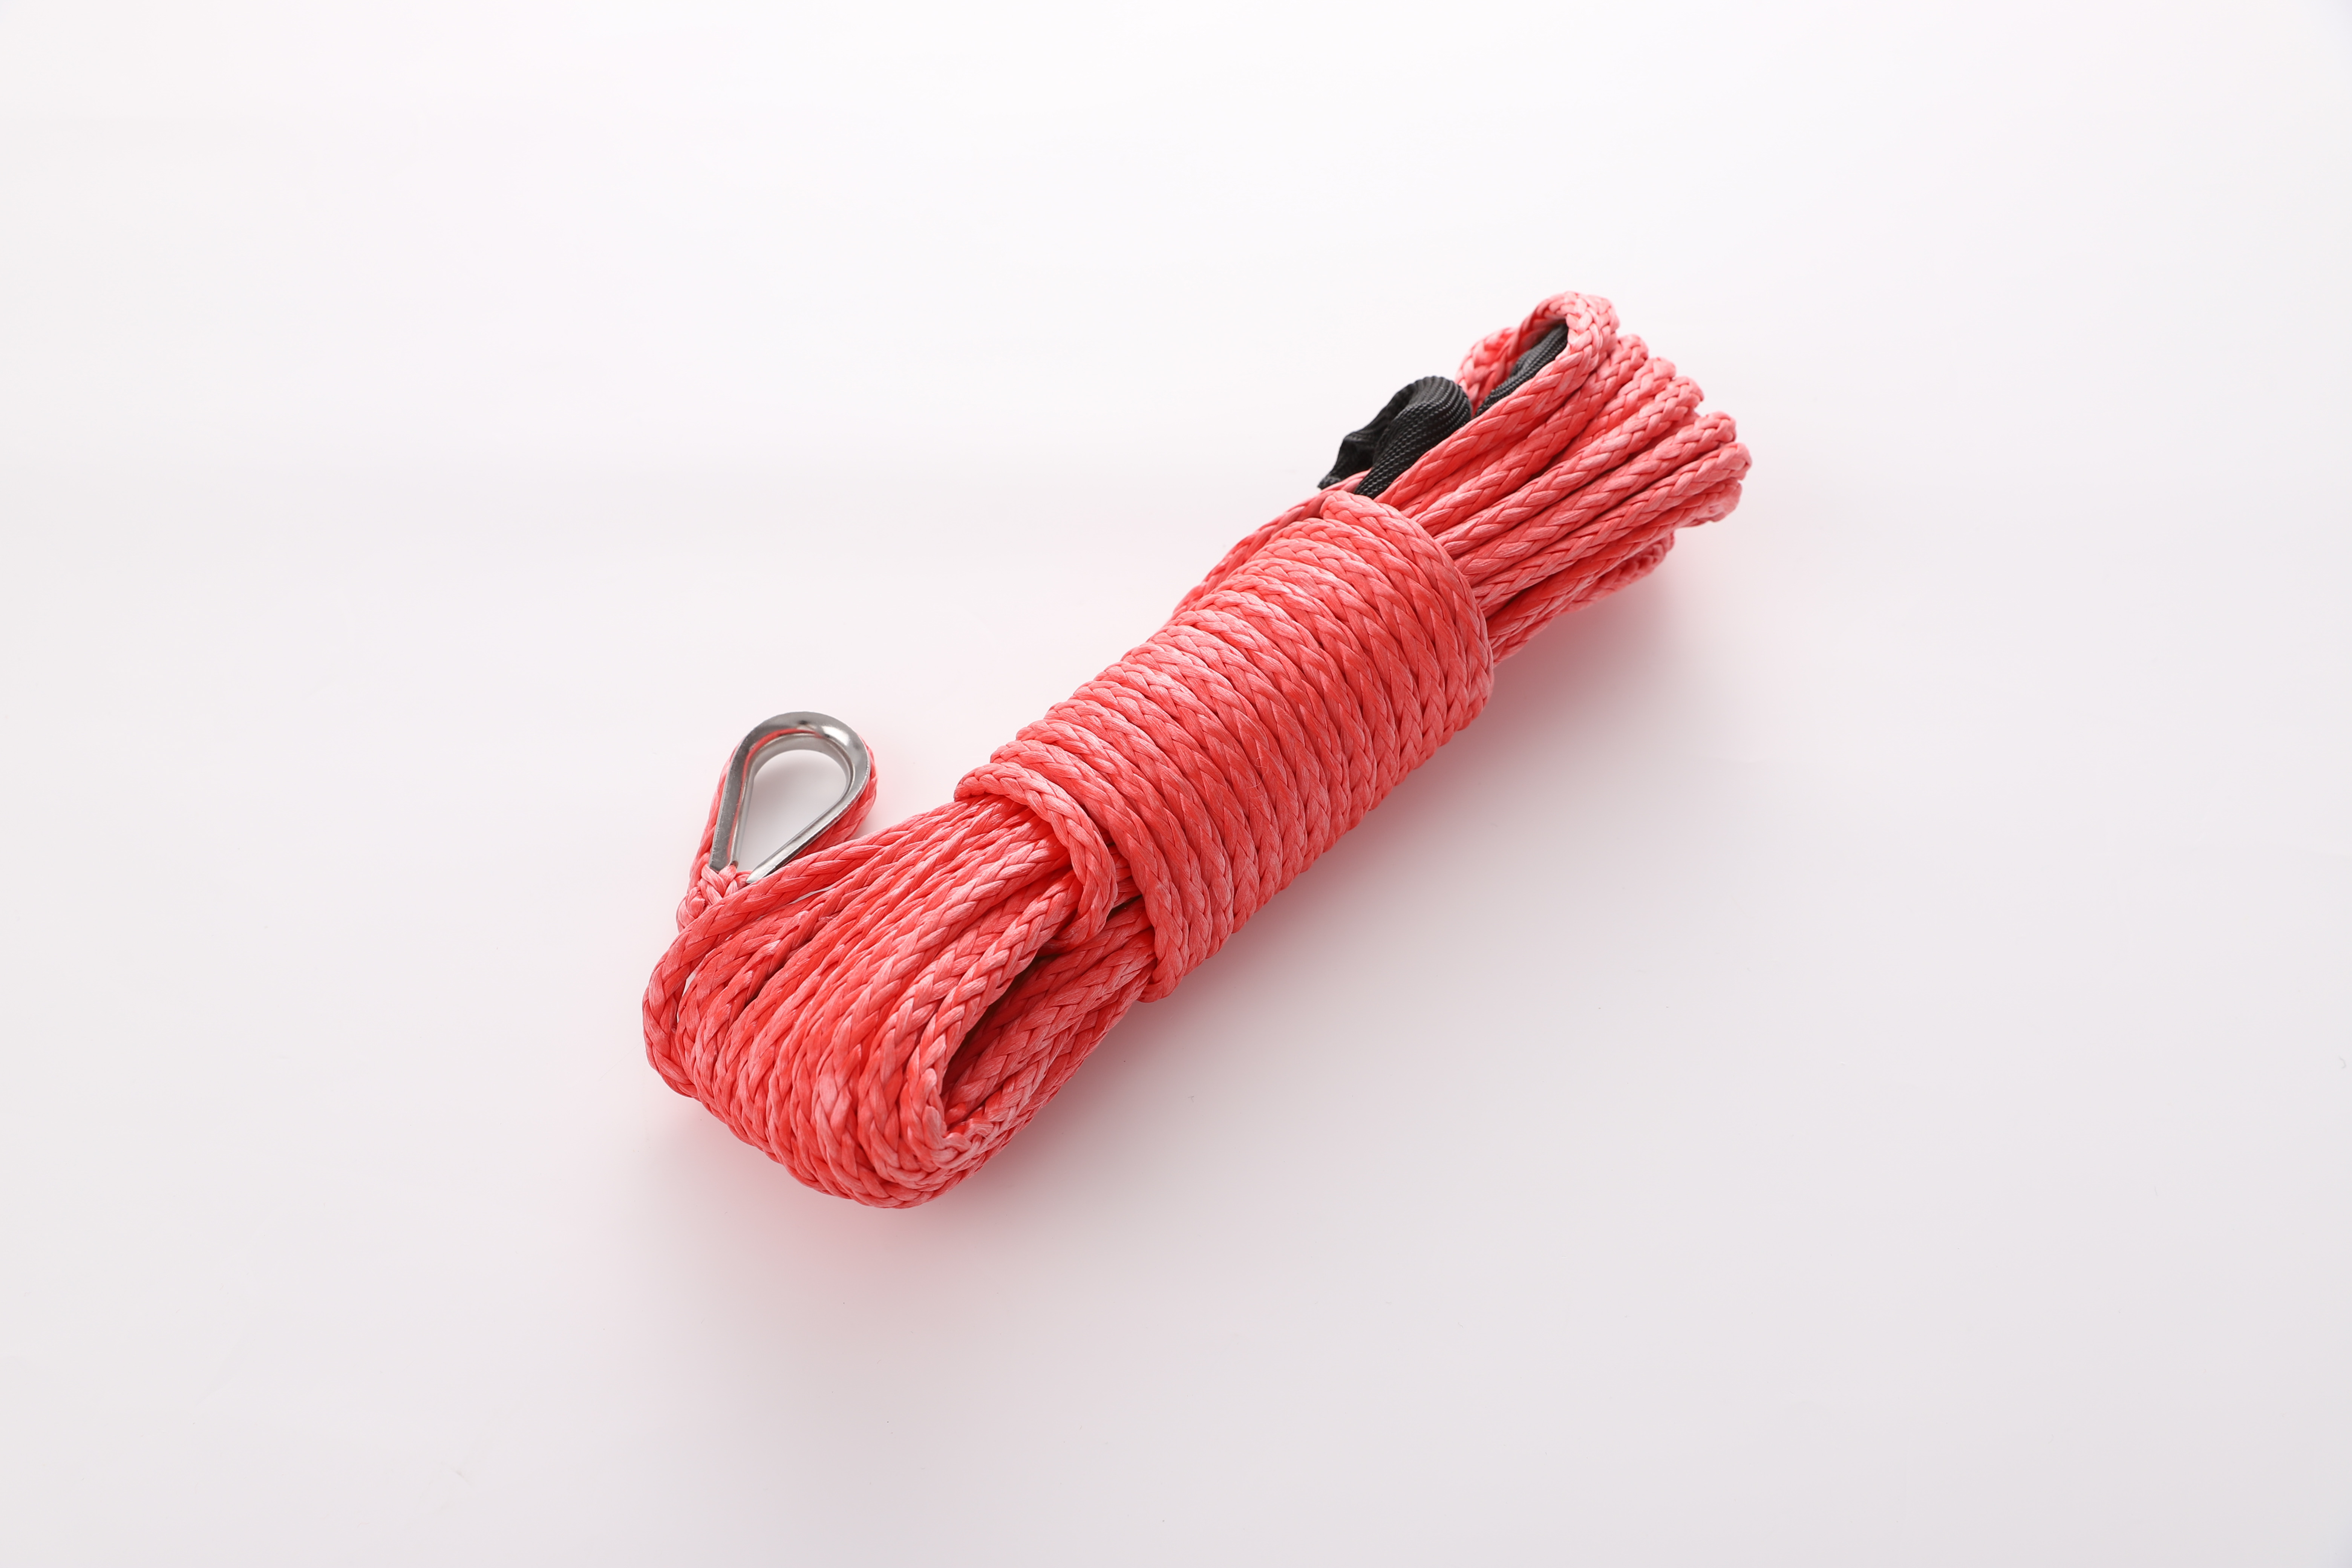 Synthetic Winch Rope 1/4" x 50' 7700LBs Towing Winch Cables